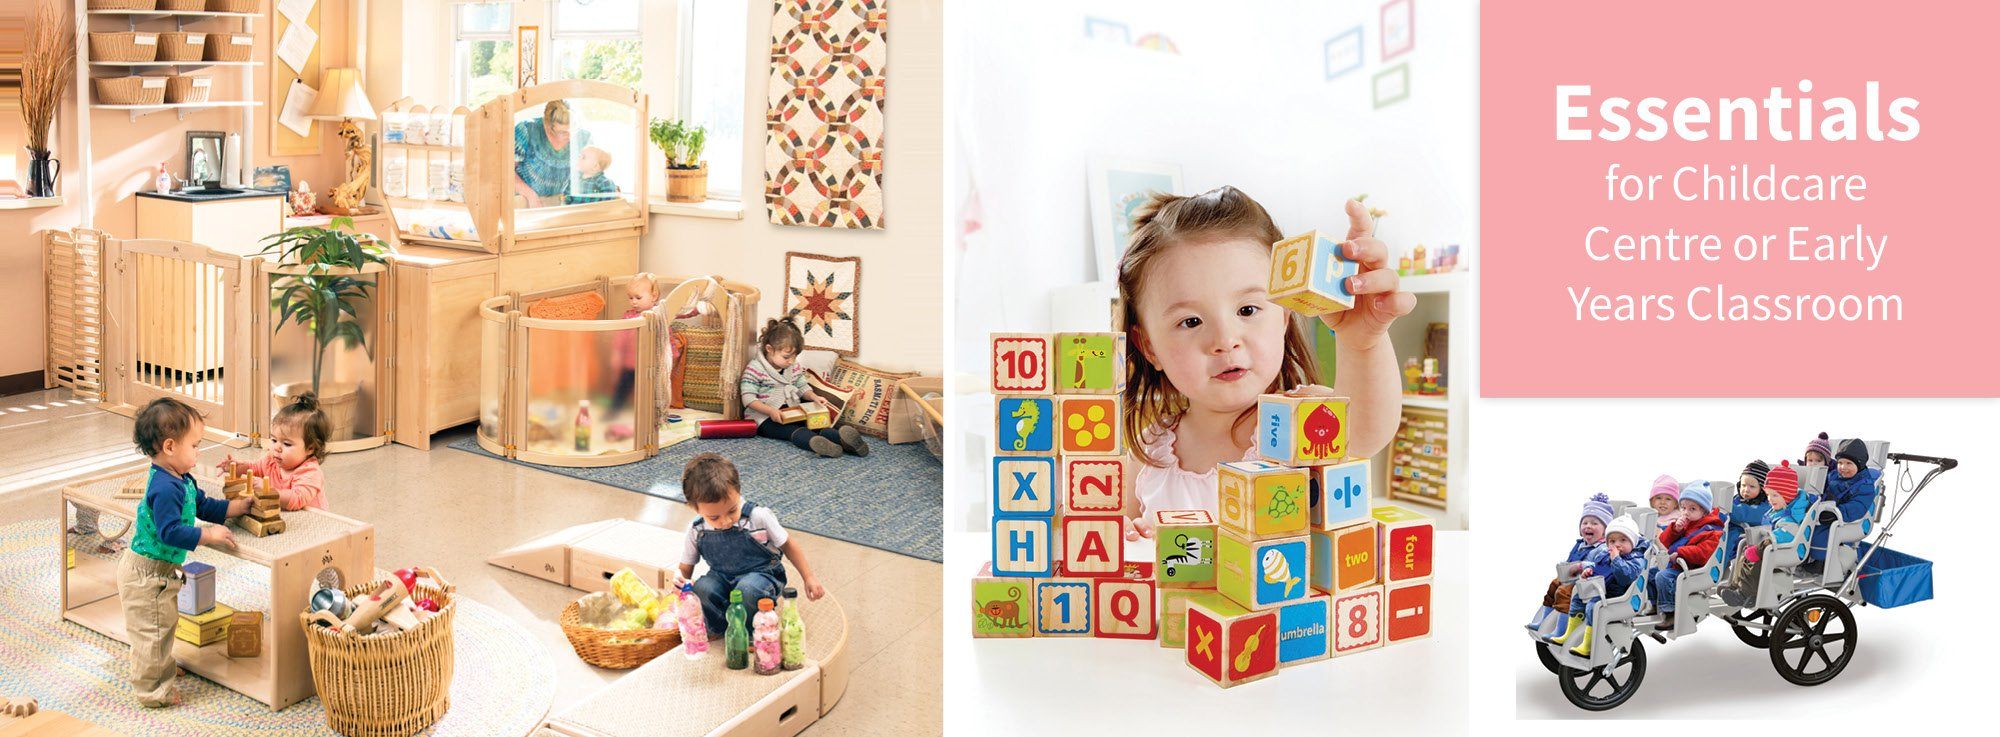 Essentials for Child Care Centre or Early Years Classroom